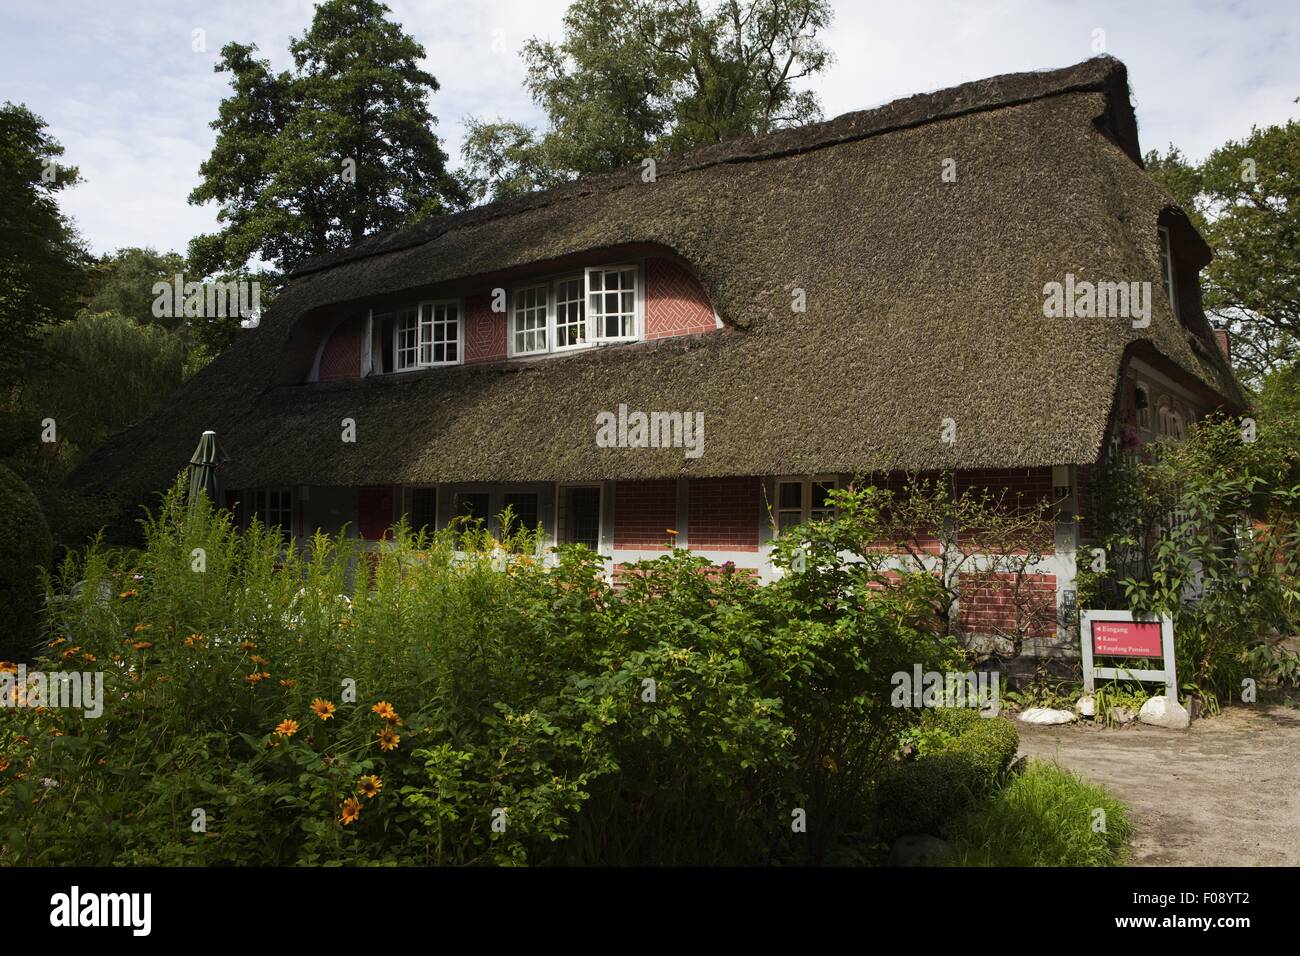 Facade of Haus im Schluh at Worpswede, Germany Stock Photo